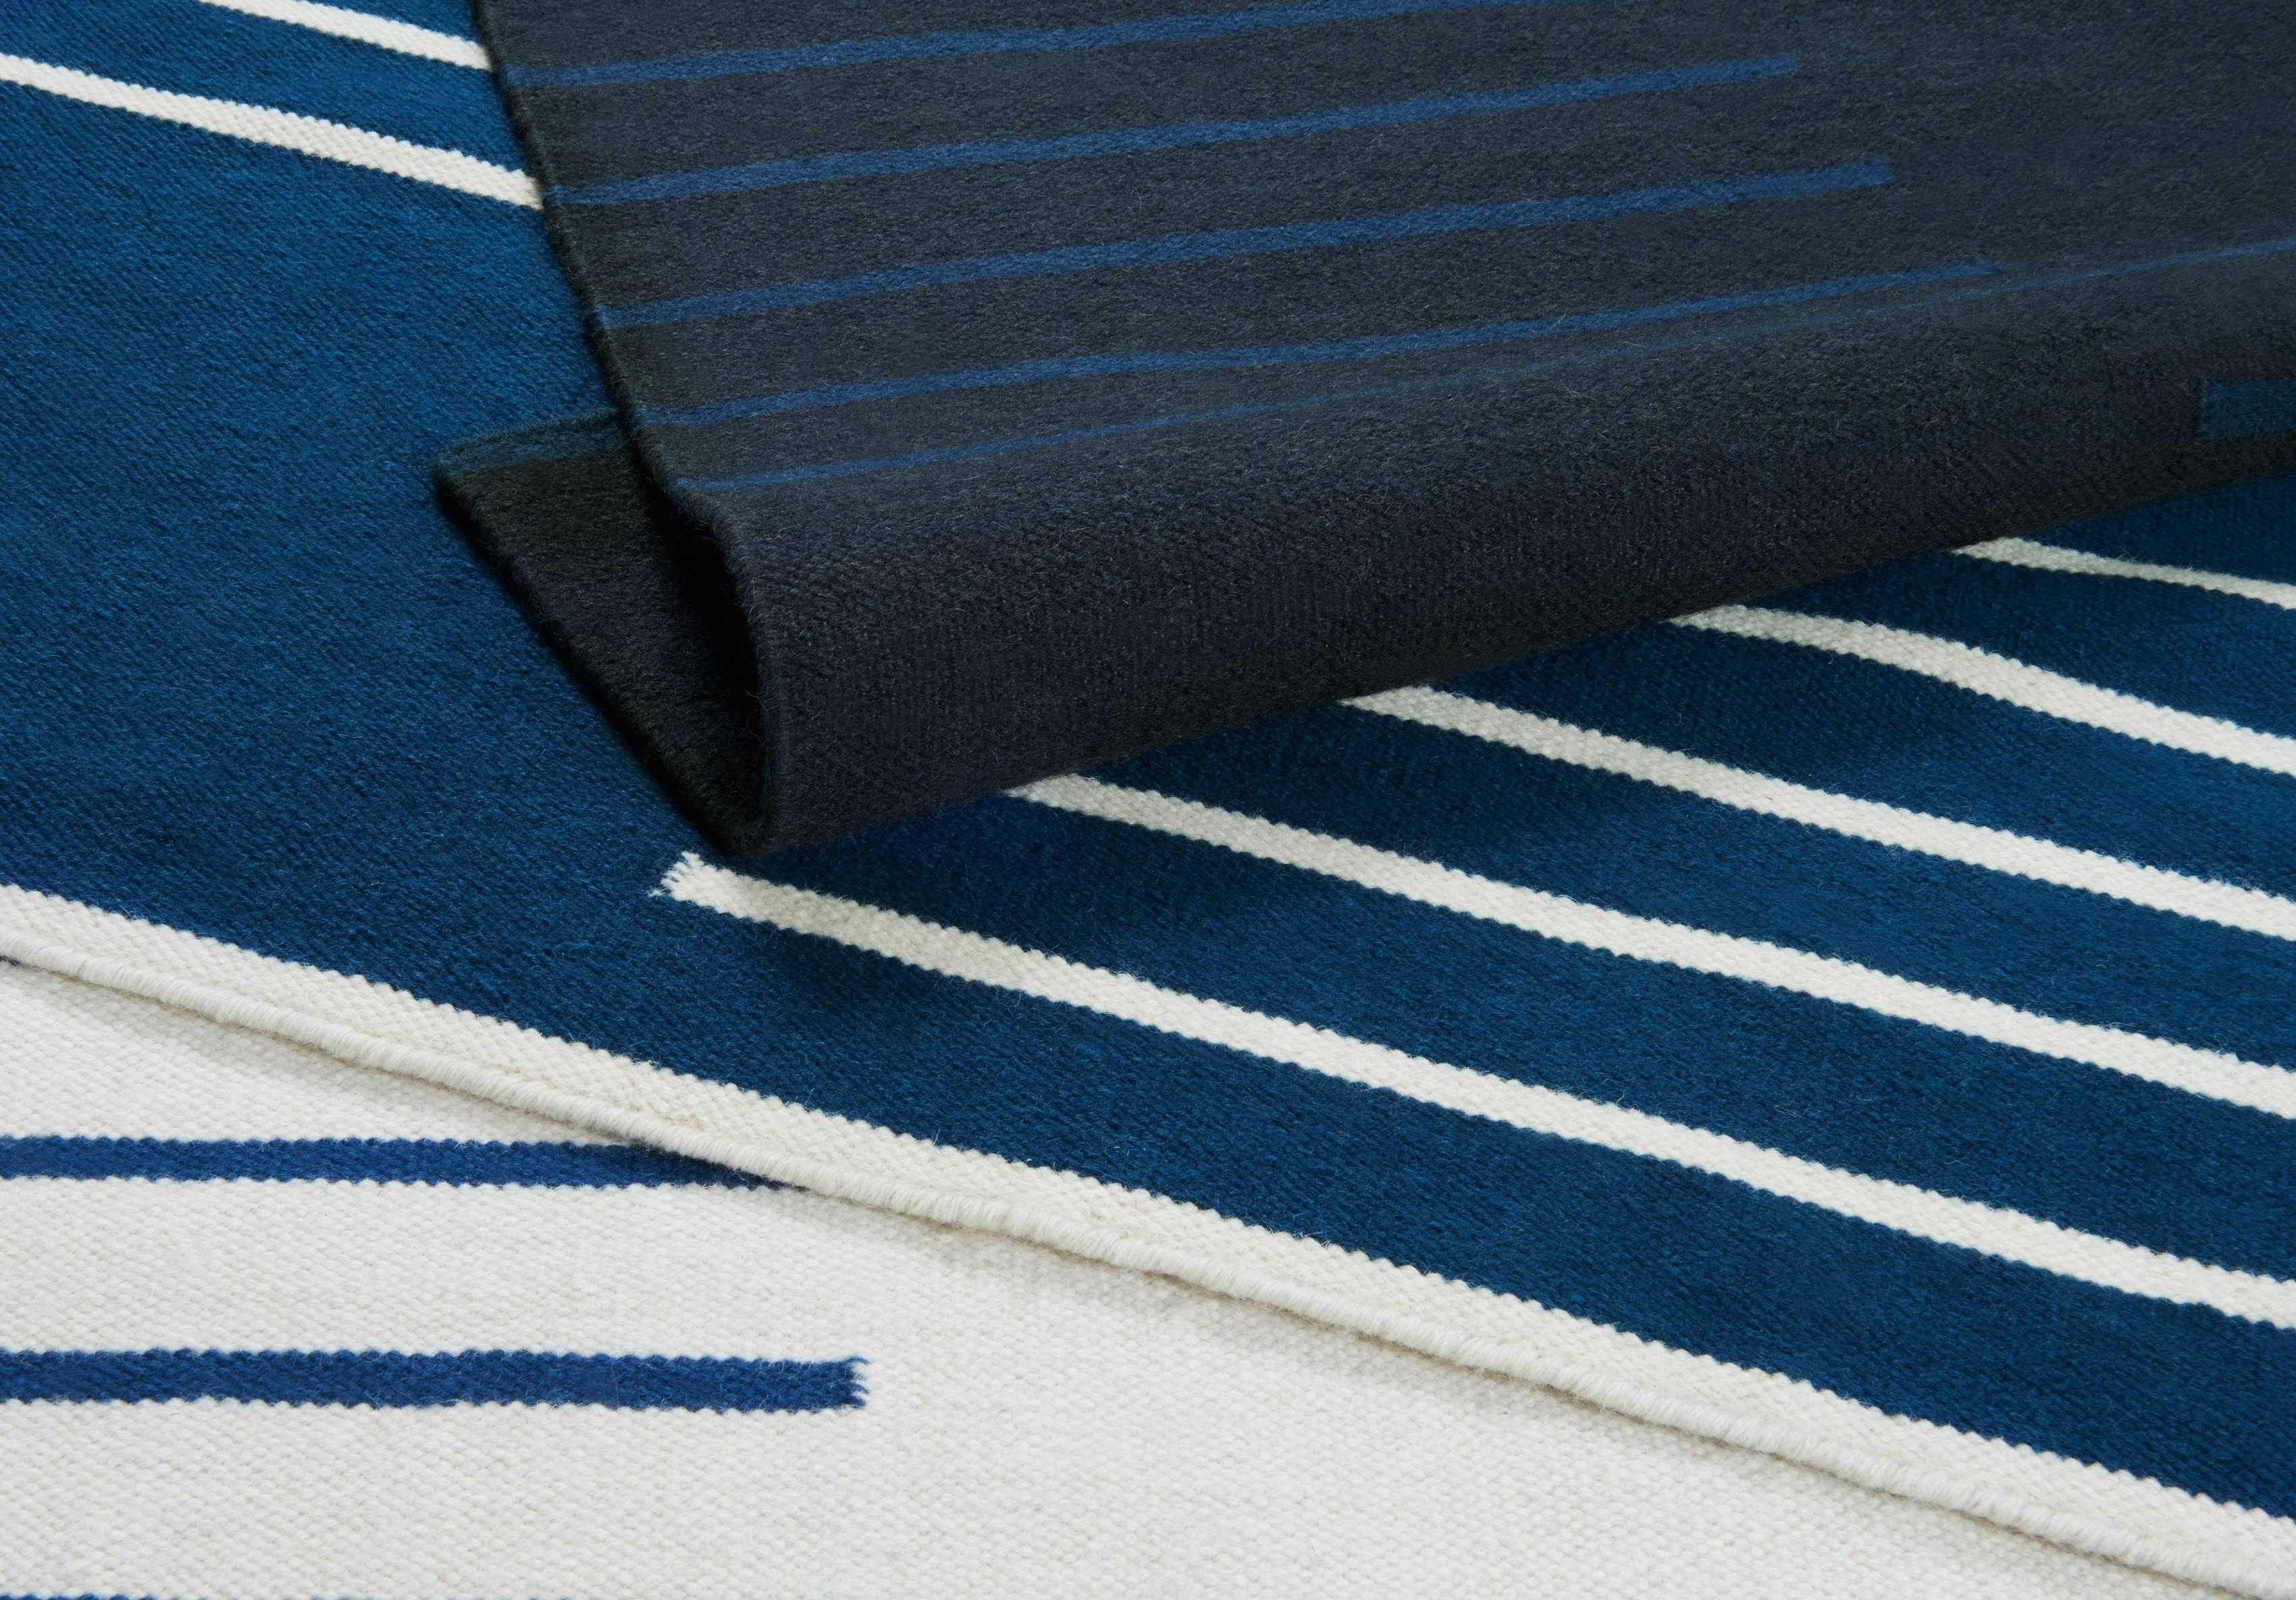 Classic Charcoal/Teal is a modern dhurrie/kilim rug in Scandinavian design. It is available in different sizes - see customization options below.

A traditional design inspired by classic Scandinavian patterns. The rug is available in contrasting